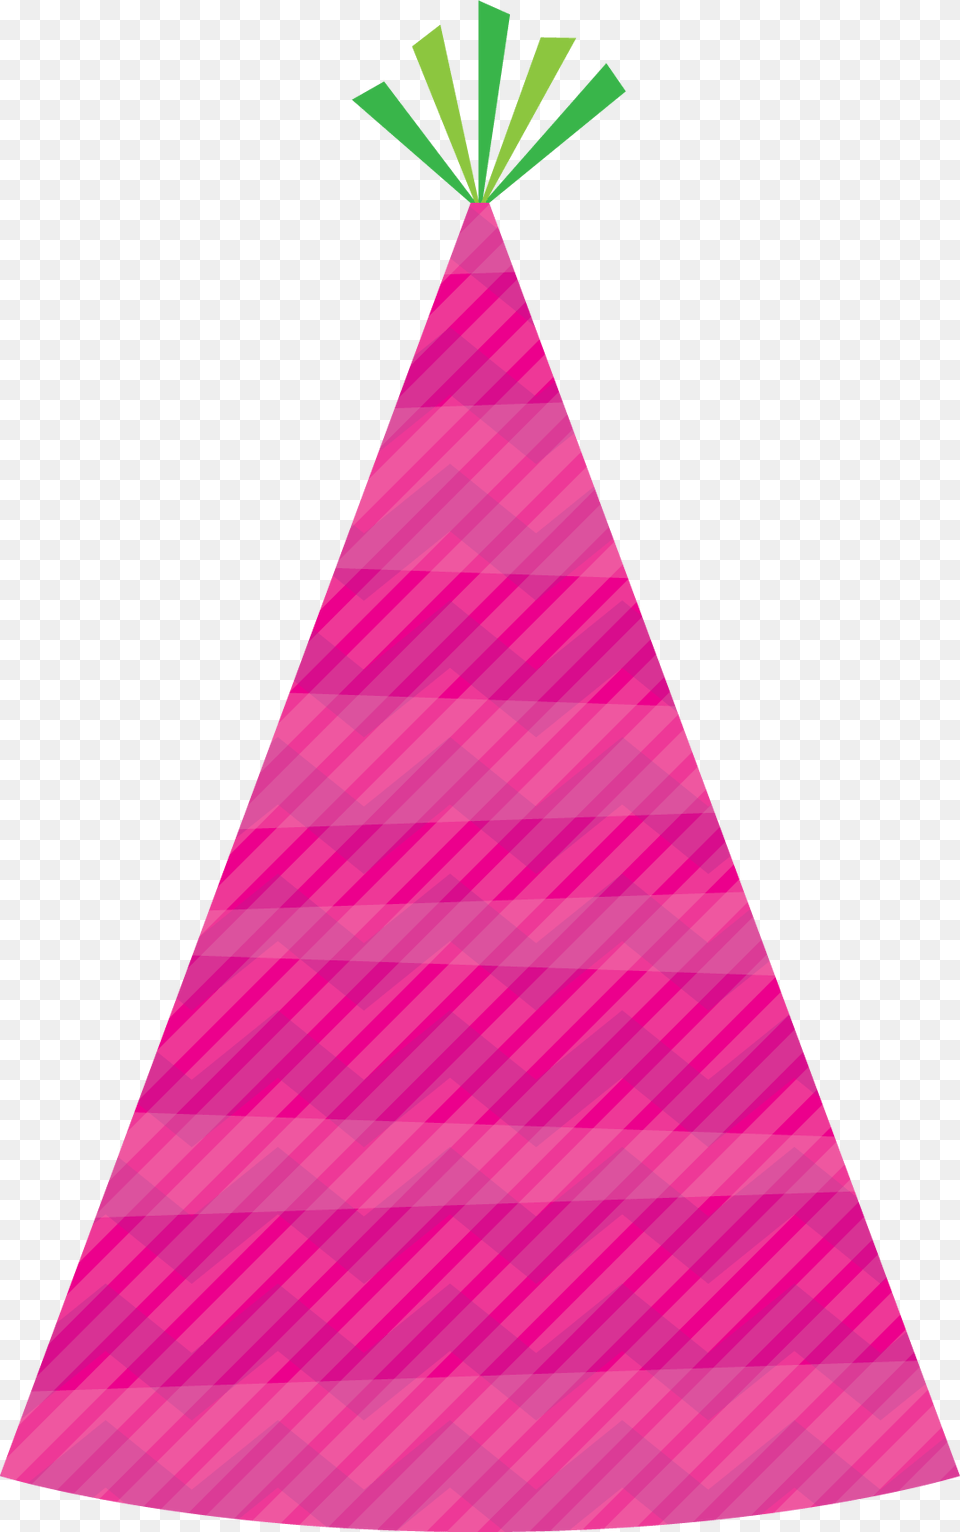 Birthday Hat Clipart Image Birth Day Hat, Clothing, Triangle Png